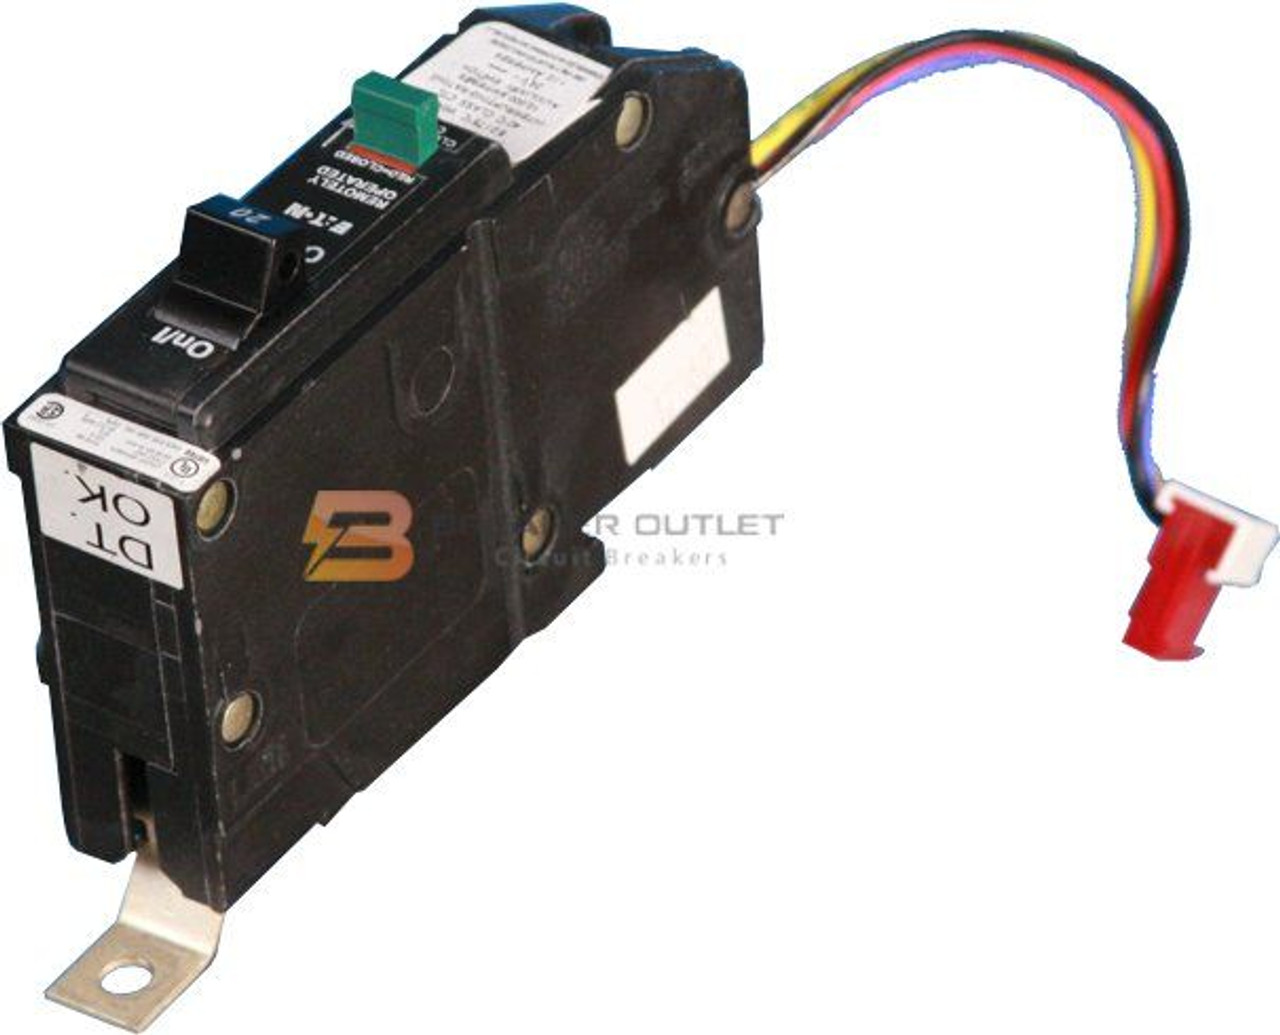 BABR1020 Remote Controlled Circuit Breaker by Cutler Hammer